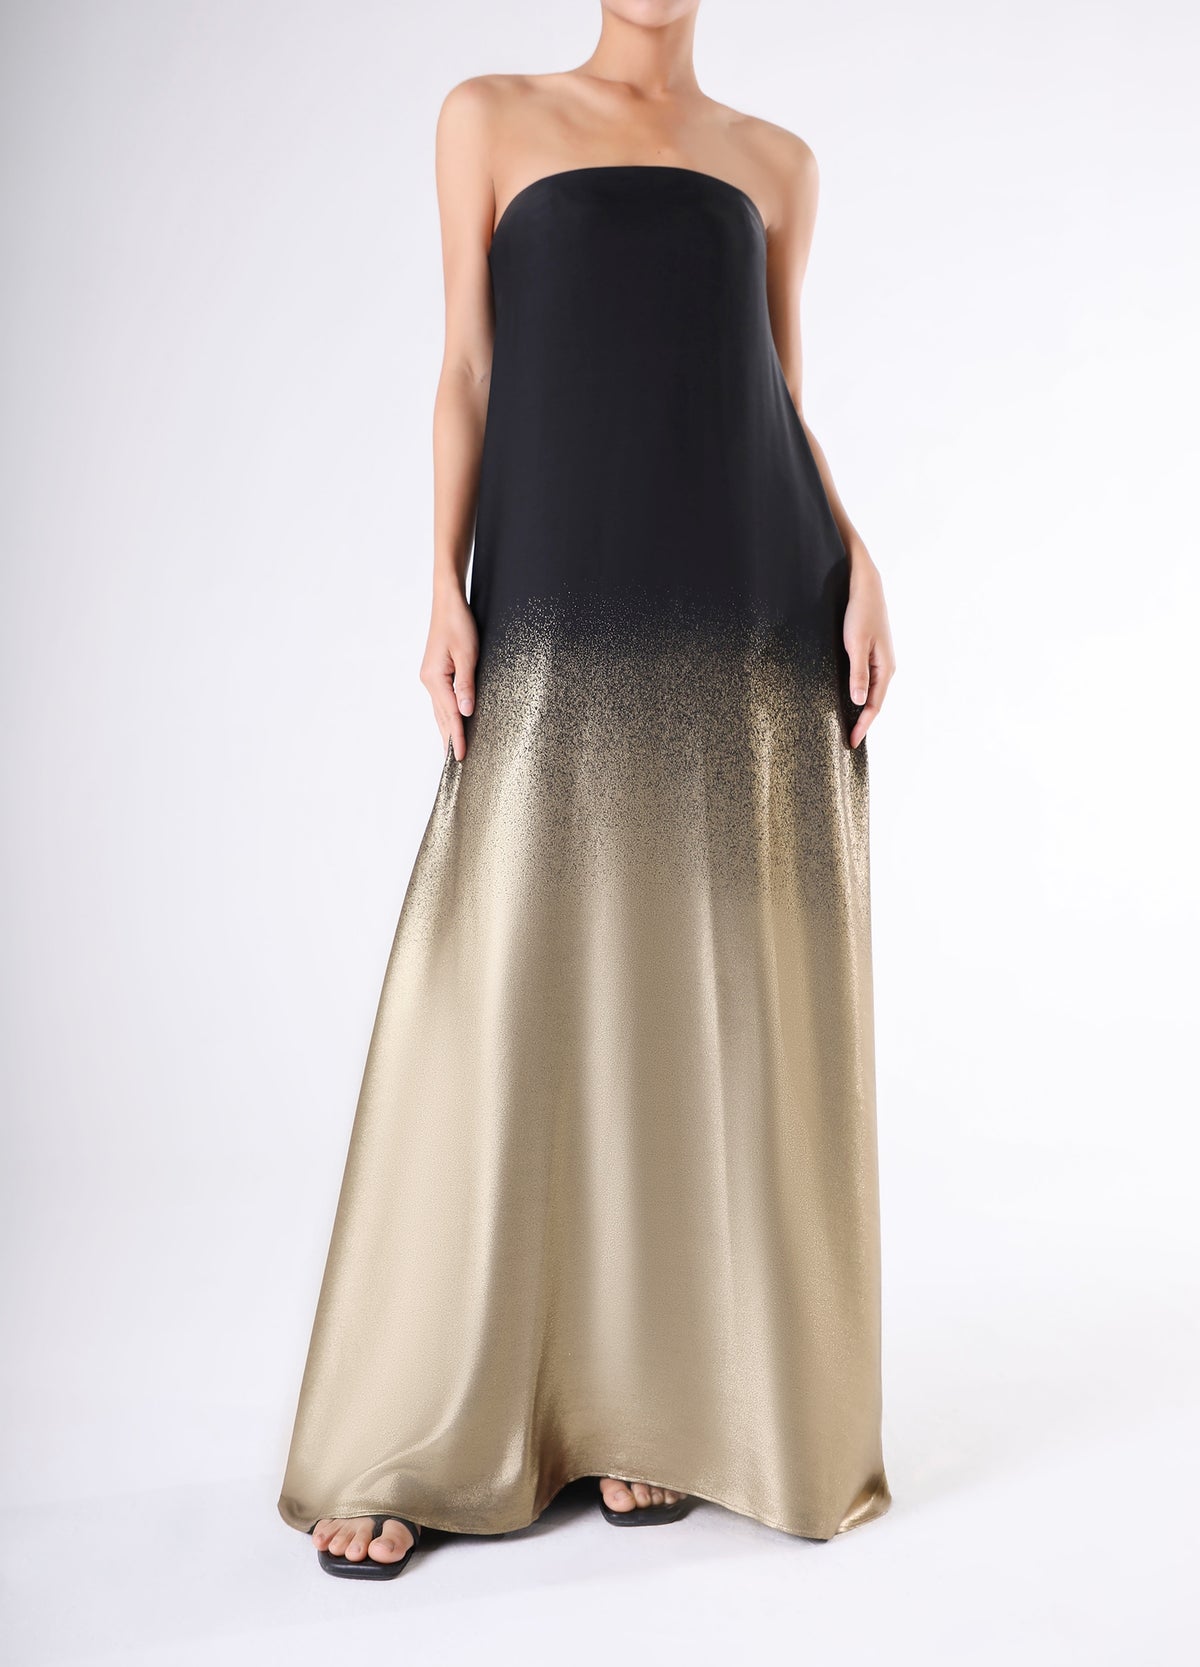 Roma dress - Black to gold ombre